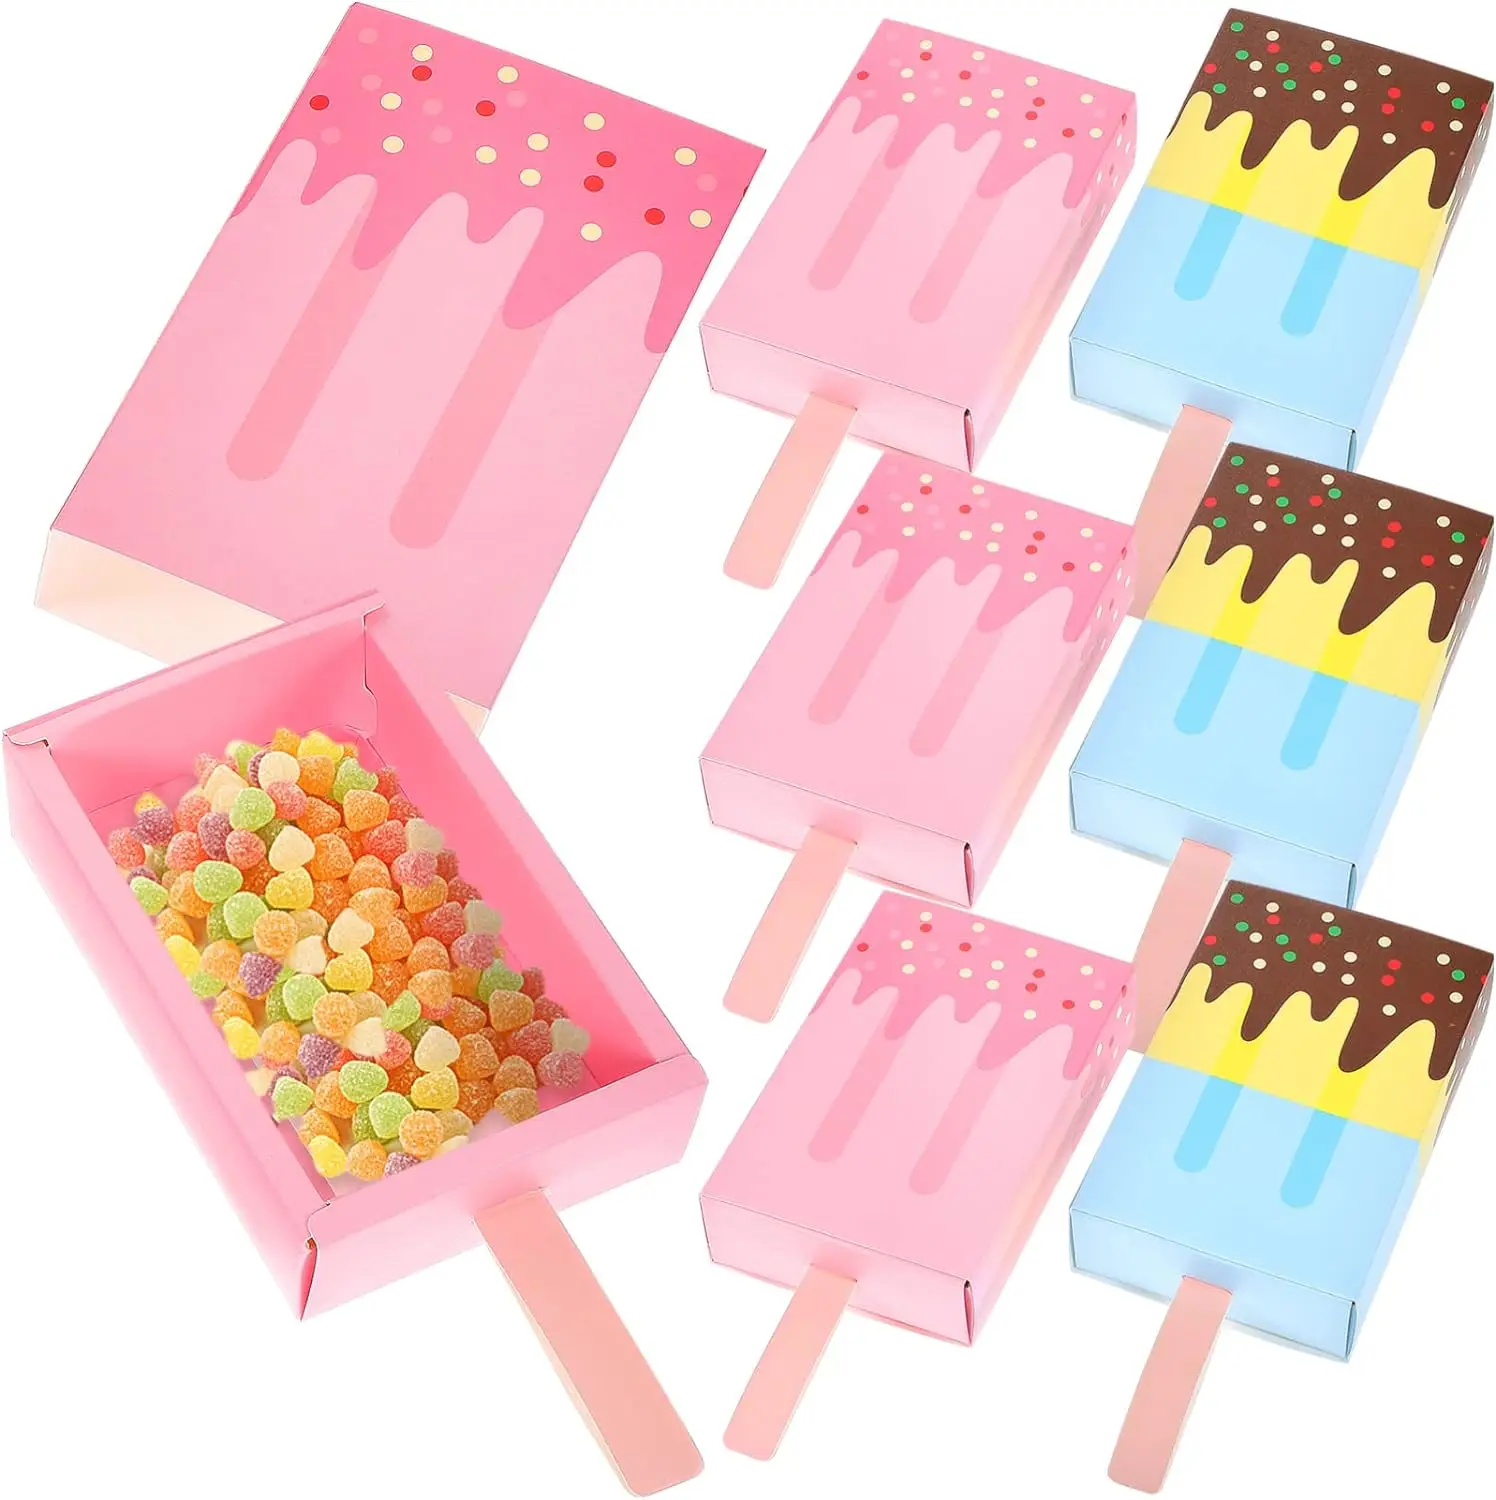 

10pcs Popsicle Shape Candy Boxes White Cardboard Ice Cream Shaped Candy Box Birthday Baby Shower Party Pull-out Treat Favors